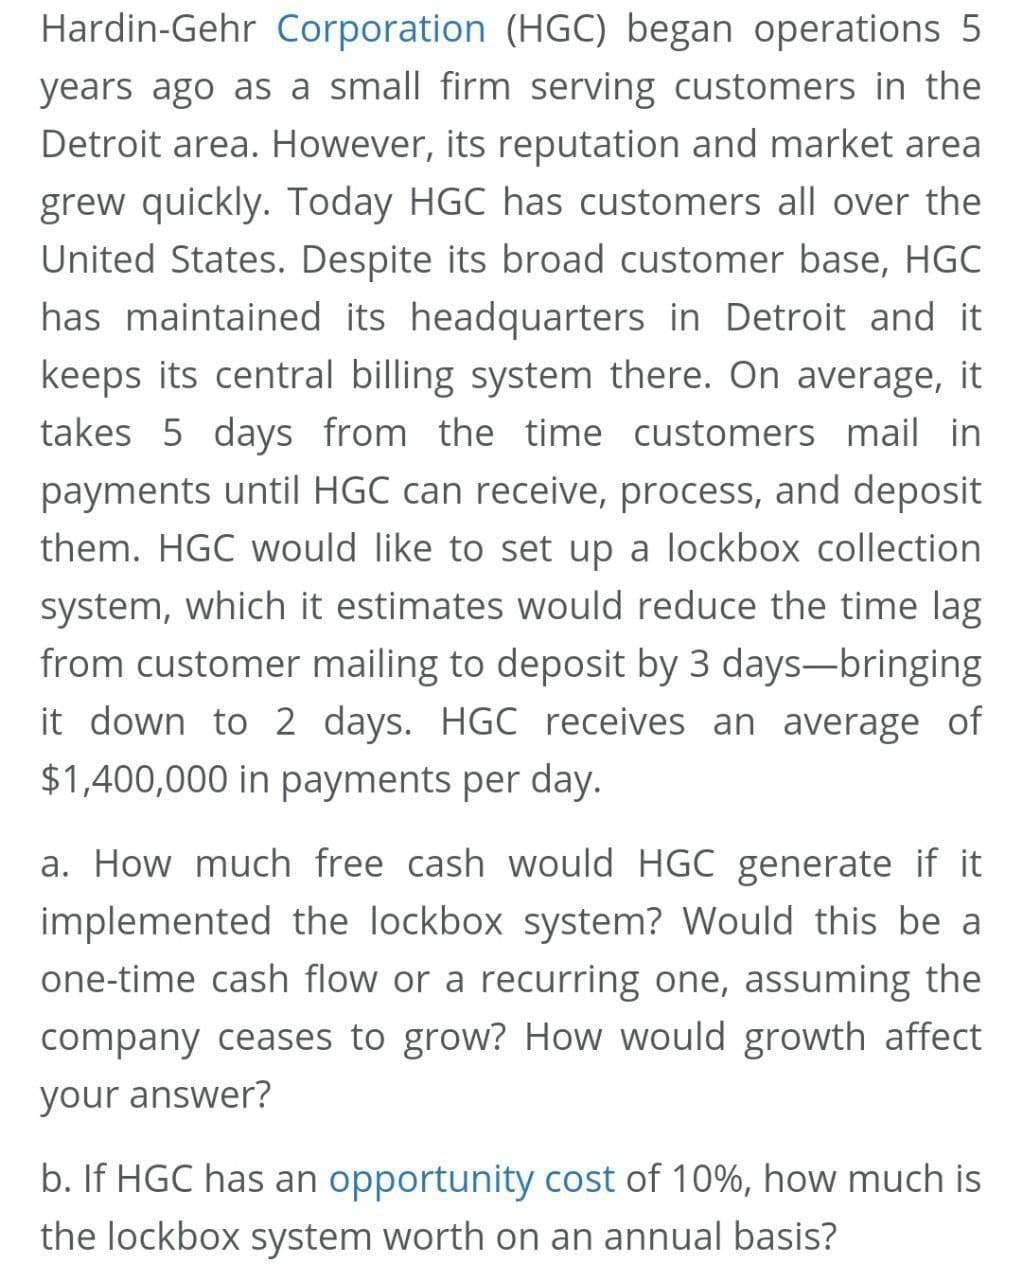 Hardin-Gehr Corporation (HGC) began operations 5
years ago as a small firm serving customers in the
Detroit area. However, its reputation and market area
grew quickly. Today HGC has customers all over the
United States. Despite its broad customer base, HGC
has maintained its headquarters in Detroit and it
keeps its central billing system there. On average, it
takes 5 days from the time customers mail in
payments until HGC can receive, process, and deposit
them. HGC would like to set up a lockbox collection
system, which it estimates would reduce the time lag
from customer mailing to deposit by 3 days-bringing
it down to 2 days. HGC receives an average of
$1,400,000 in payments per day.
a. How much free cash would HGC generate if it
implemented the lockbox system? Would this be a
one-time cash flow or a recurring one, assuming the
company ceases to grow? How would growth affect
your answer?
b. If HGC has an opportunity cost of 10%, how much is
the lockbox system worth on an annual basis?
